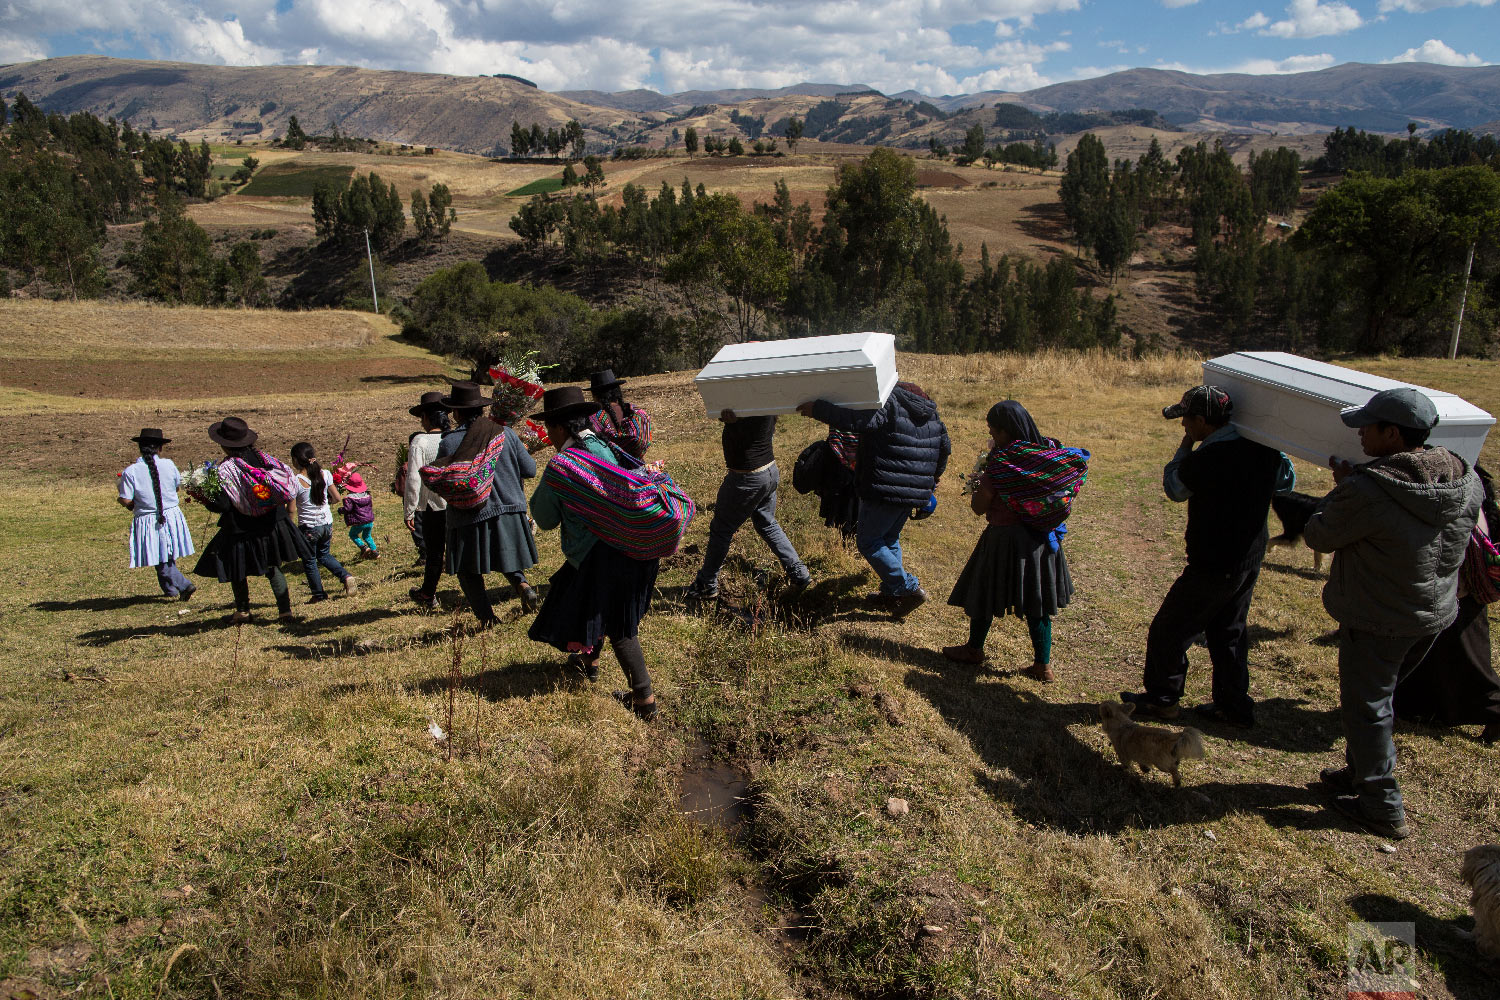  In this Aug. 15, 2018 photo, villagers carry the remains of people killed by the Shining Path guerrillas in 1984, during their proper burial in Tantana, in Peru's Ayacucho province. (AP Photo/Rodrigo Abd) 